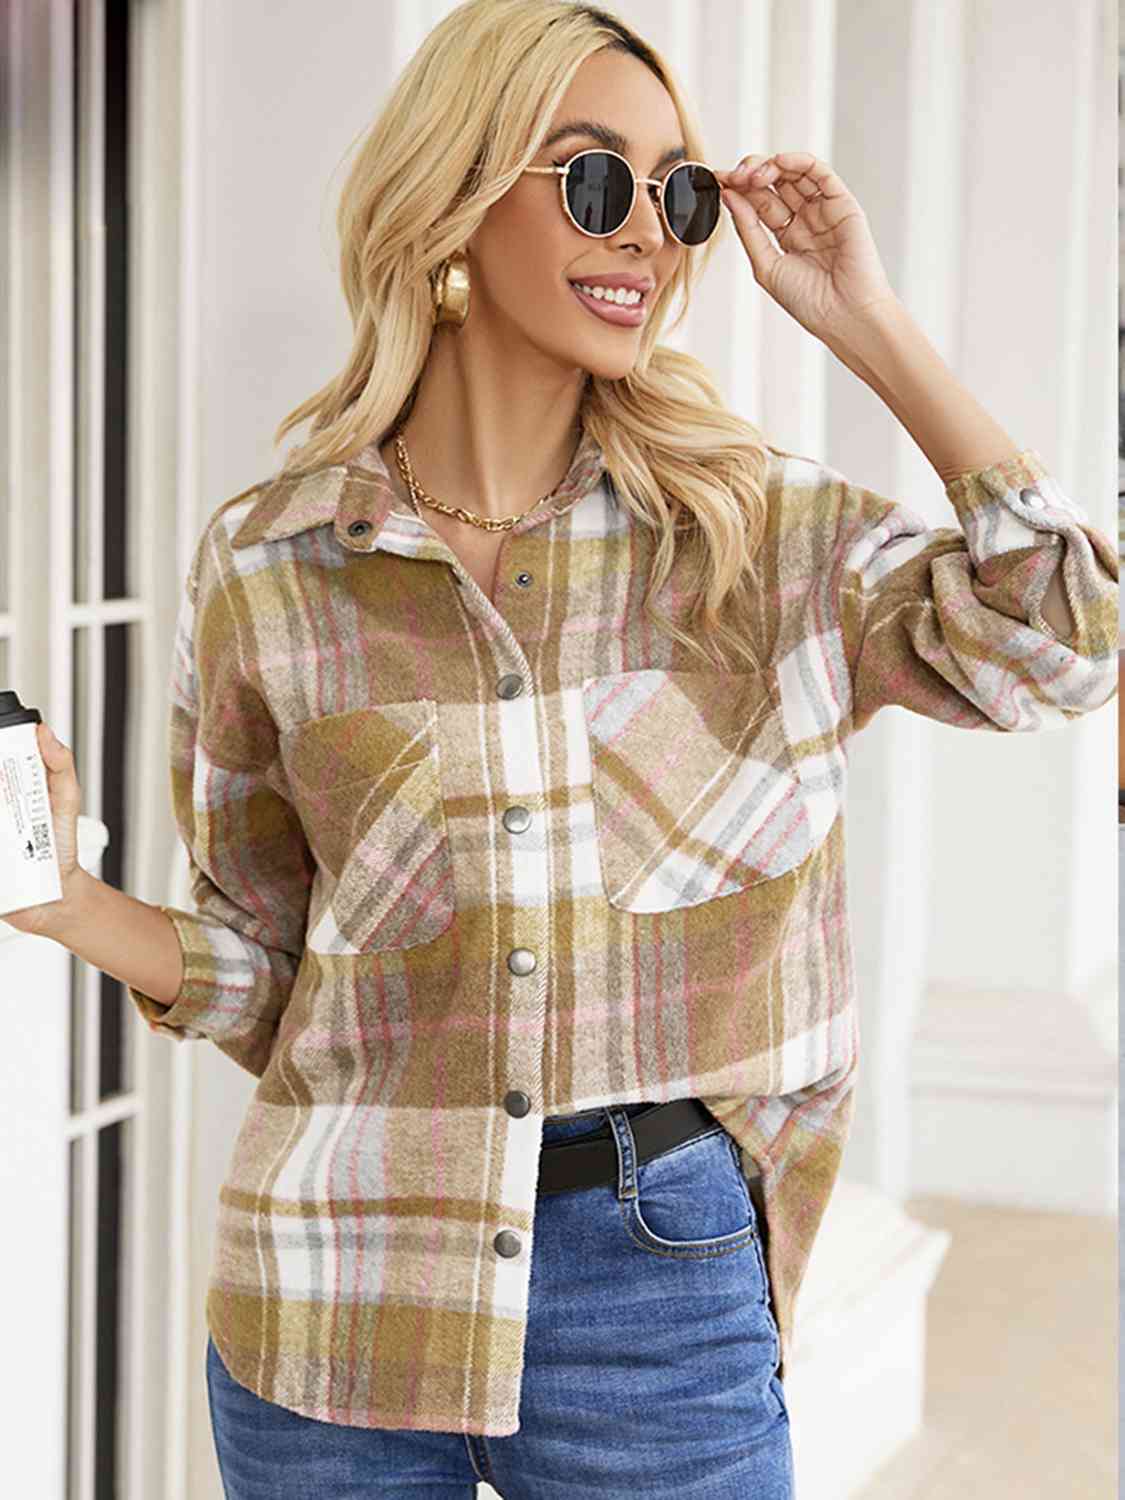 Light Gray Snap Up Plaid Collared Neck Jacket with Pocket Sentient Beauty Fashions Apparel & Accessories